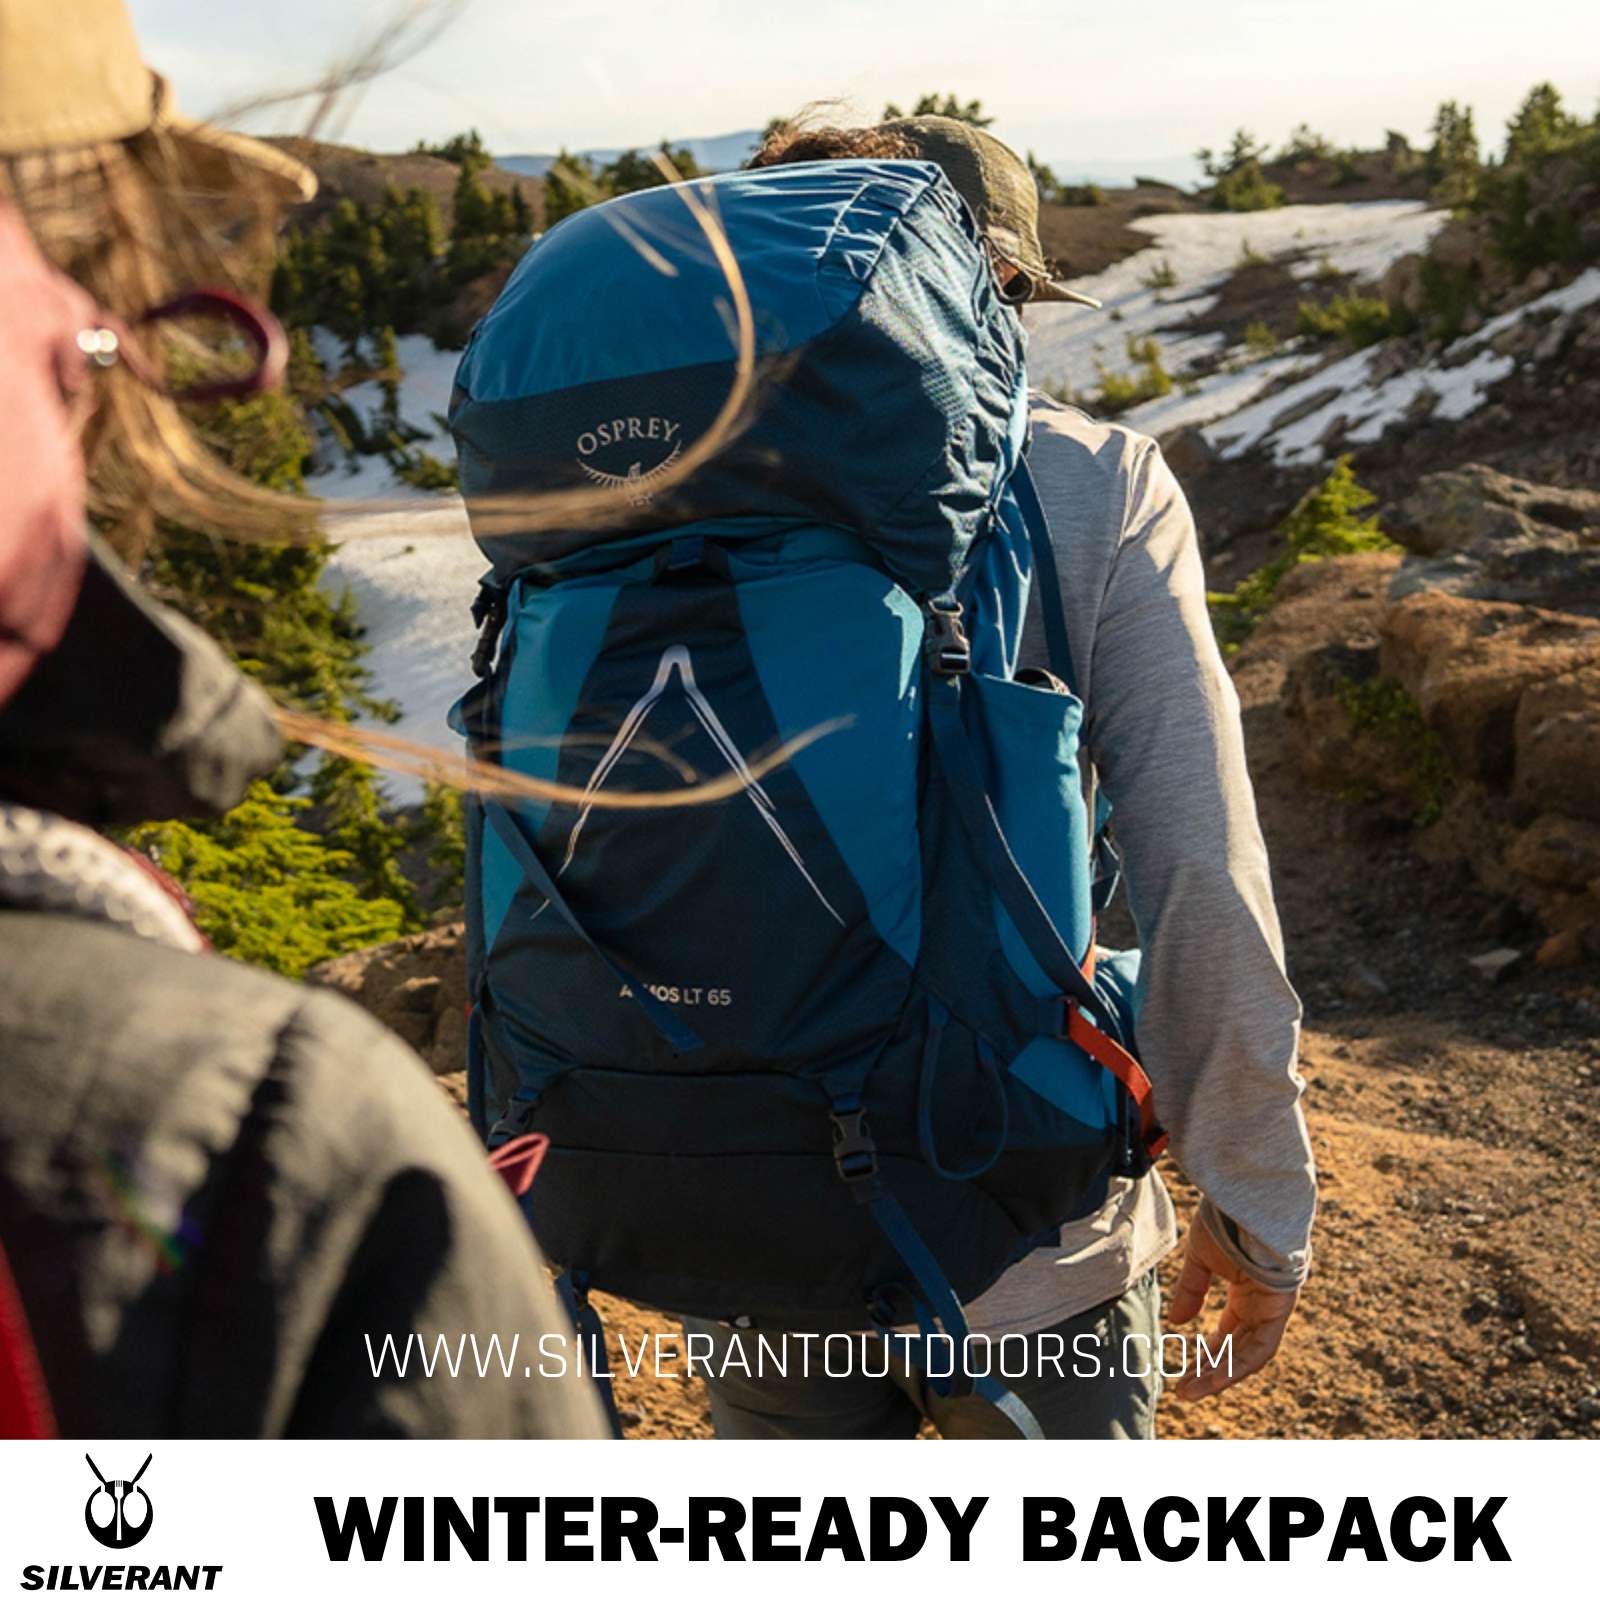 Winter-Ready Backpack